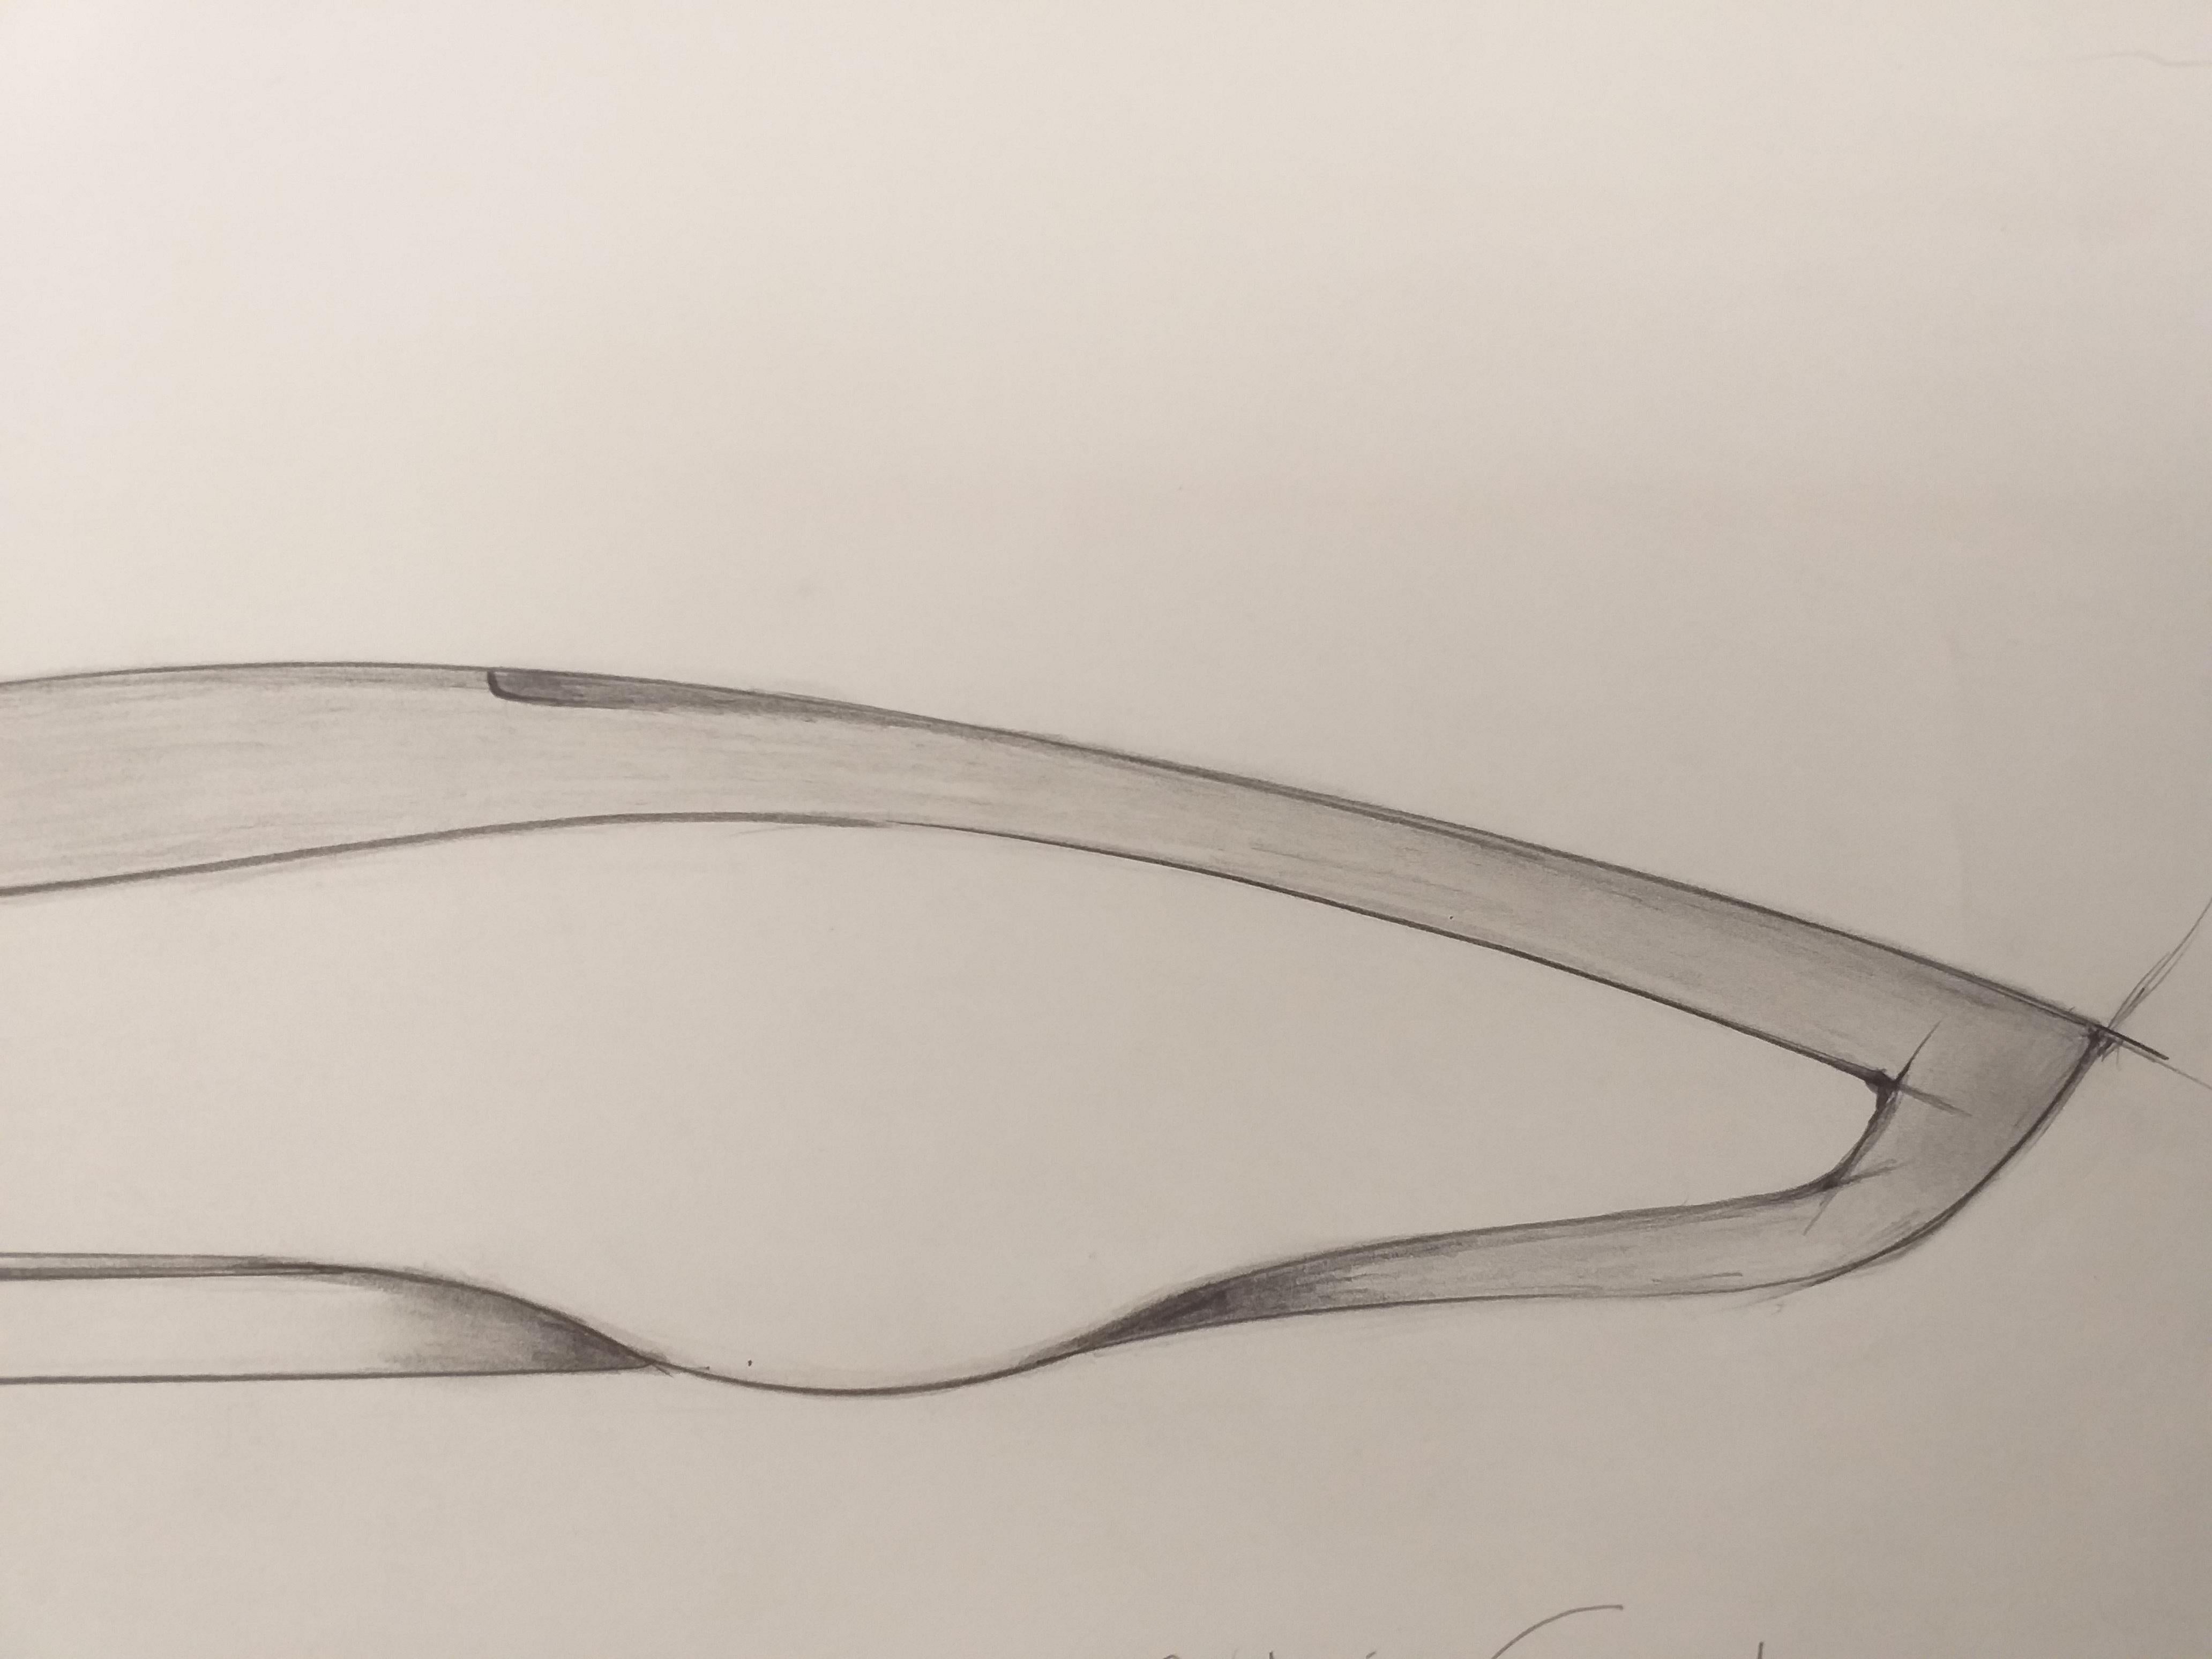 André Ferrand. 
The perfect line. 
Original work : pencil. 
Signed & dated lower right. 
L 65cm. H 25cm.
290€.